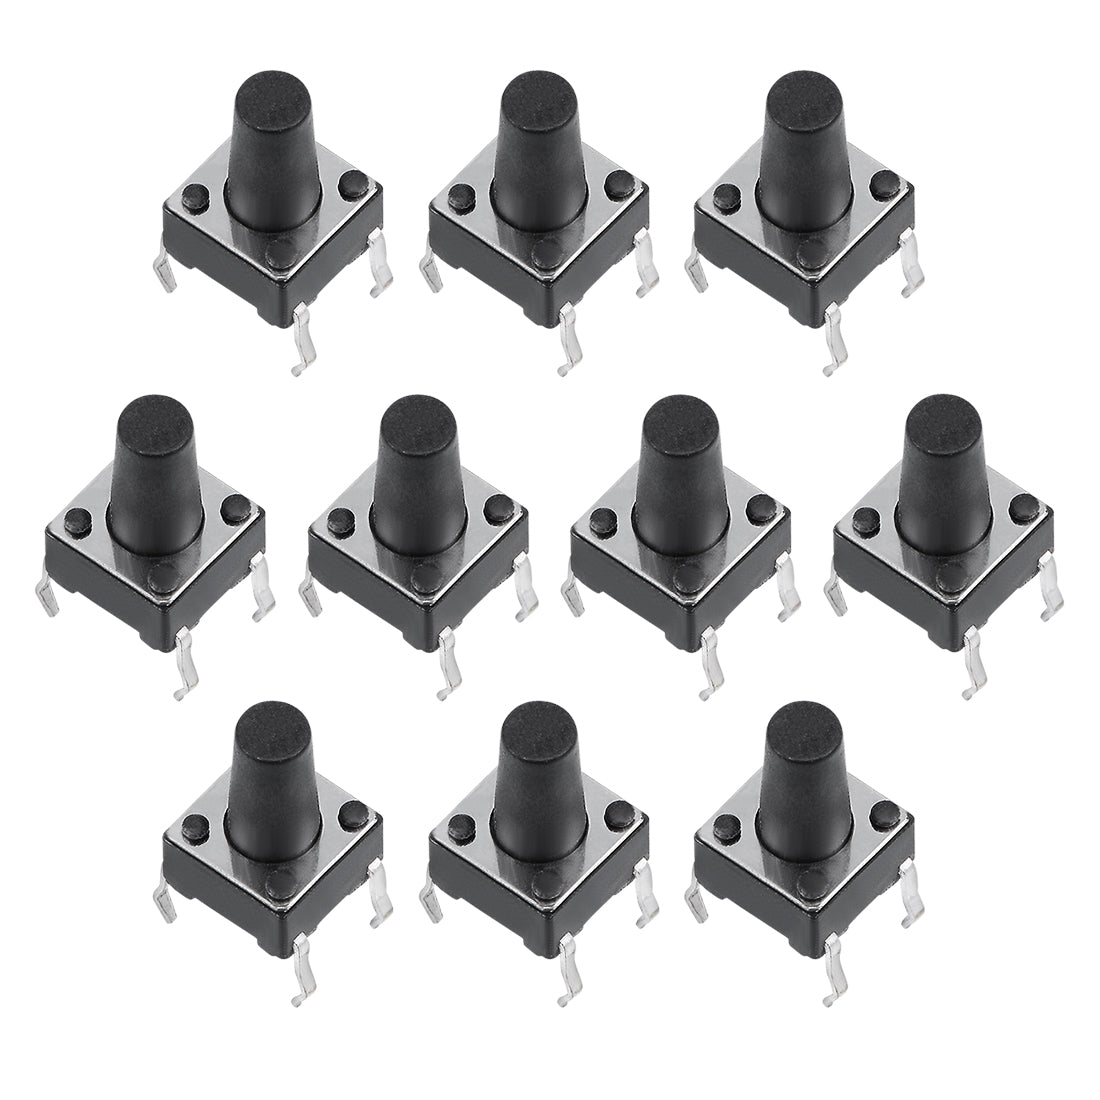 uxcell Uxcell 6x6x9.5mm Panel Mini/Micro/Small PCB Momentary Tactile Tact Push Button Switch DIP 10PCS